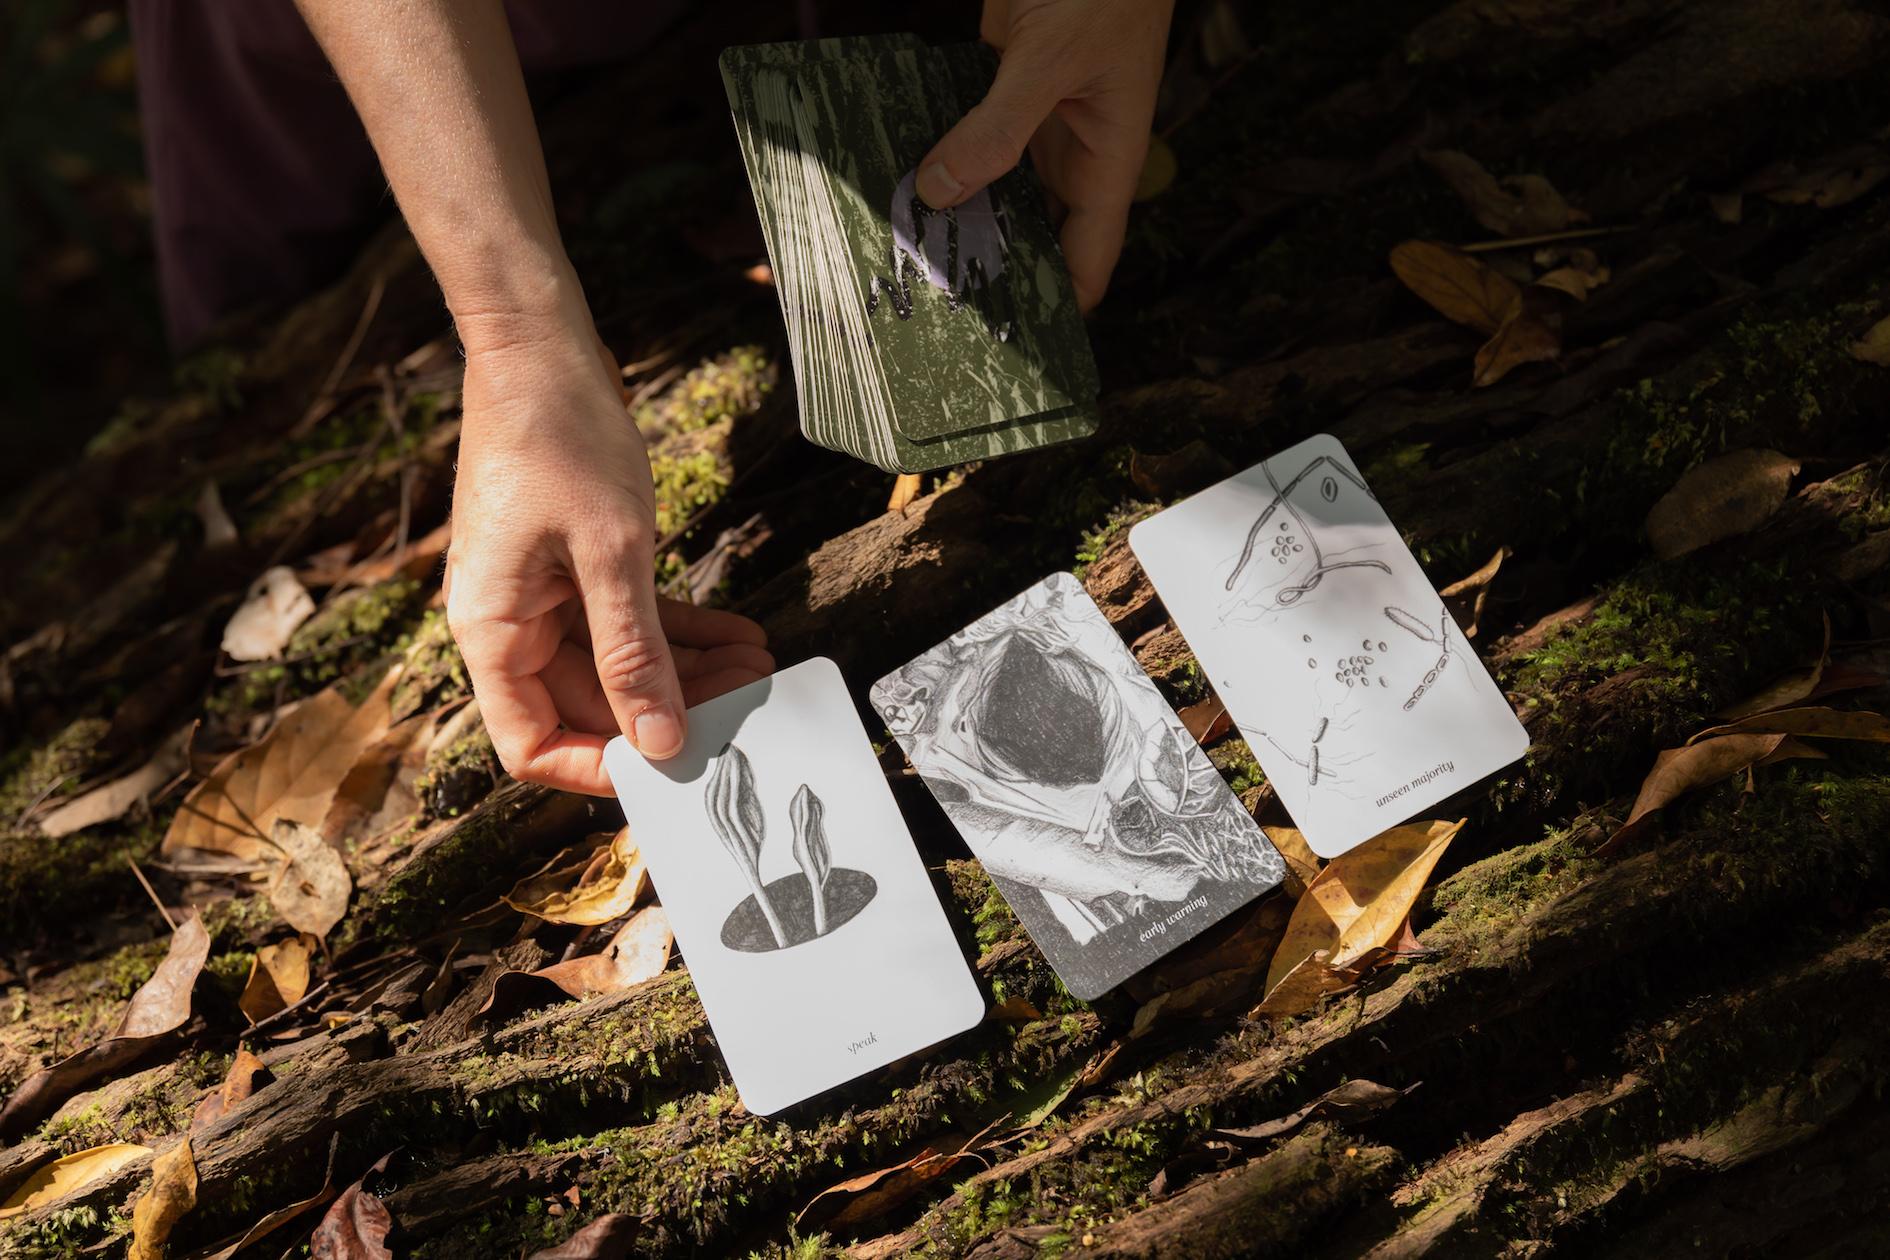 Photo of divination cards  artwork Recompose. The image is cropped to show two hands – one holding deck of cards and the other placing a card down on a mossy tree log covered in autumn leaves next to two other cards. The cards have botanical-like illustration artworks on them in greyscale.